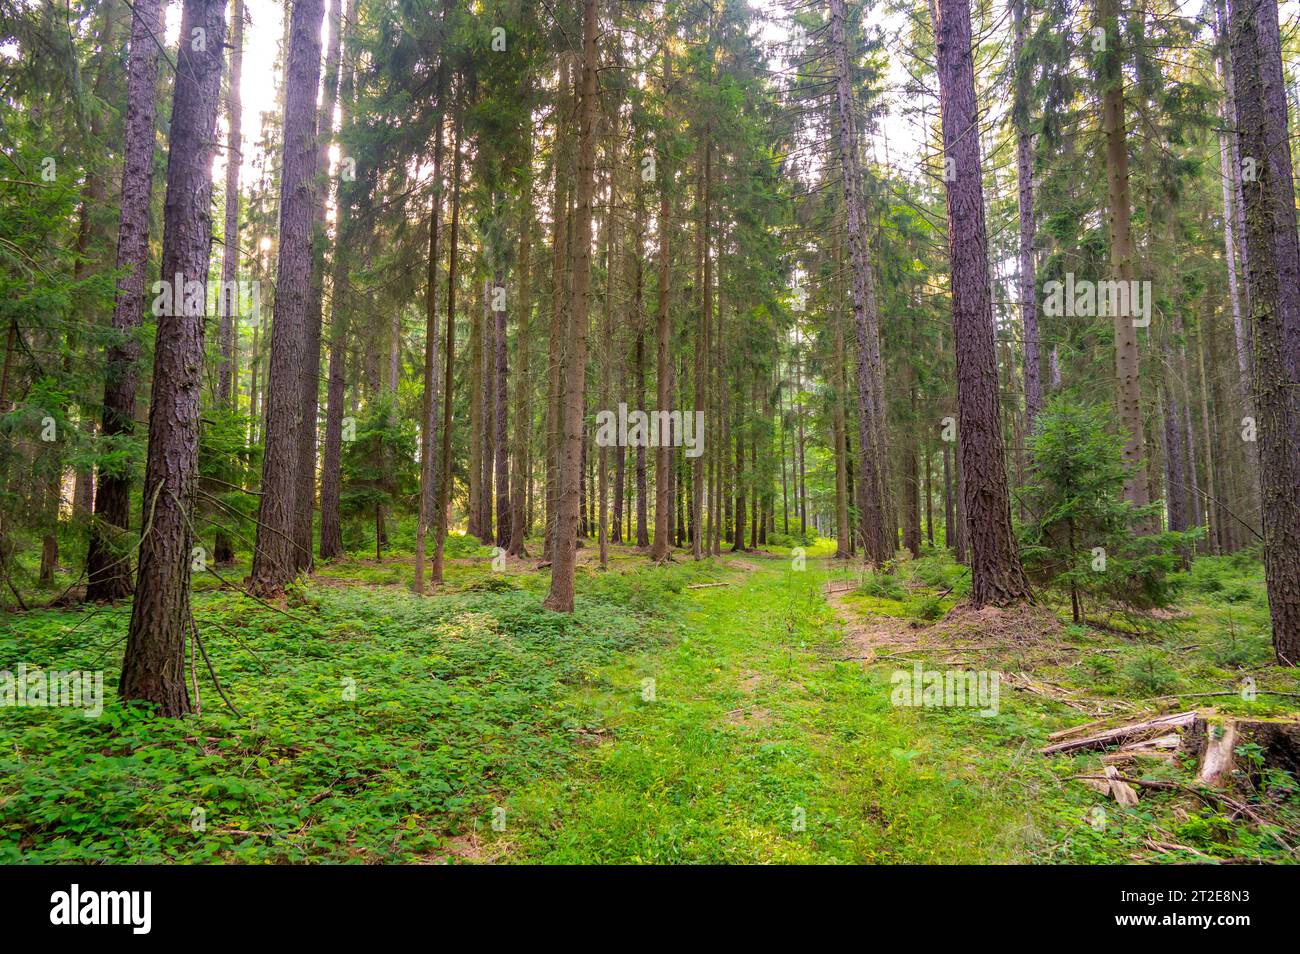 View of magical forest in soft light. Detail of forest lumber industry. Stock Photo